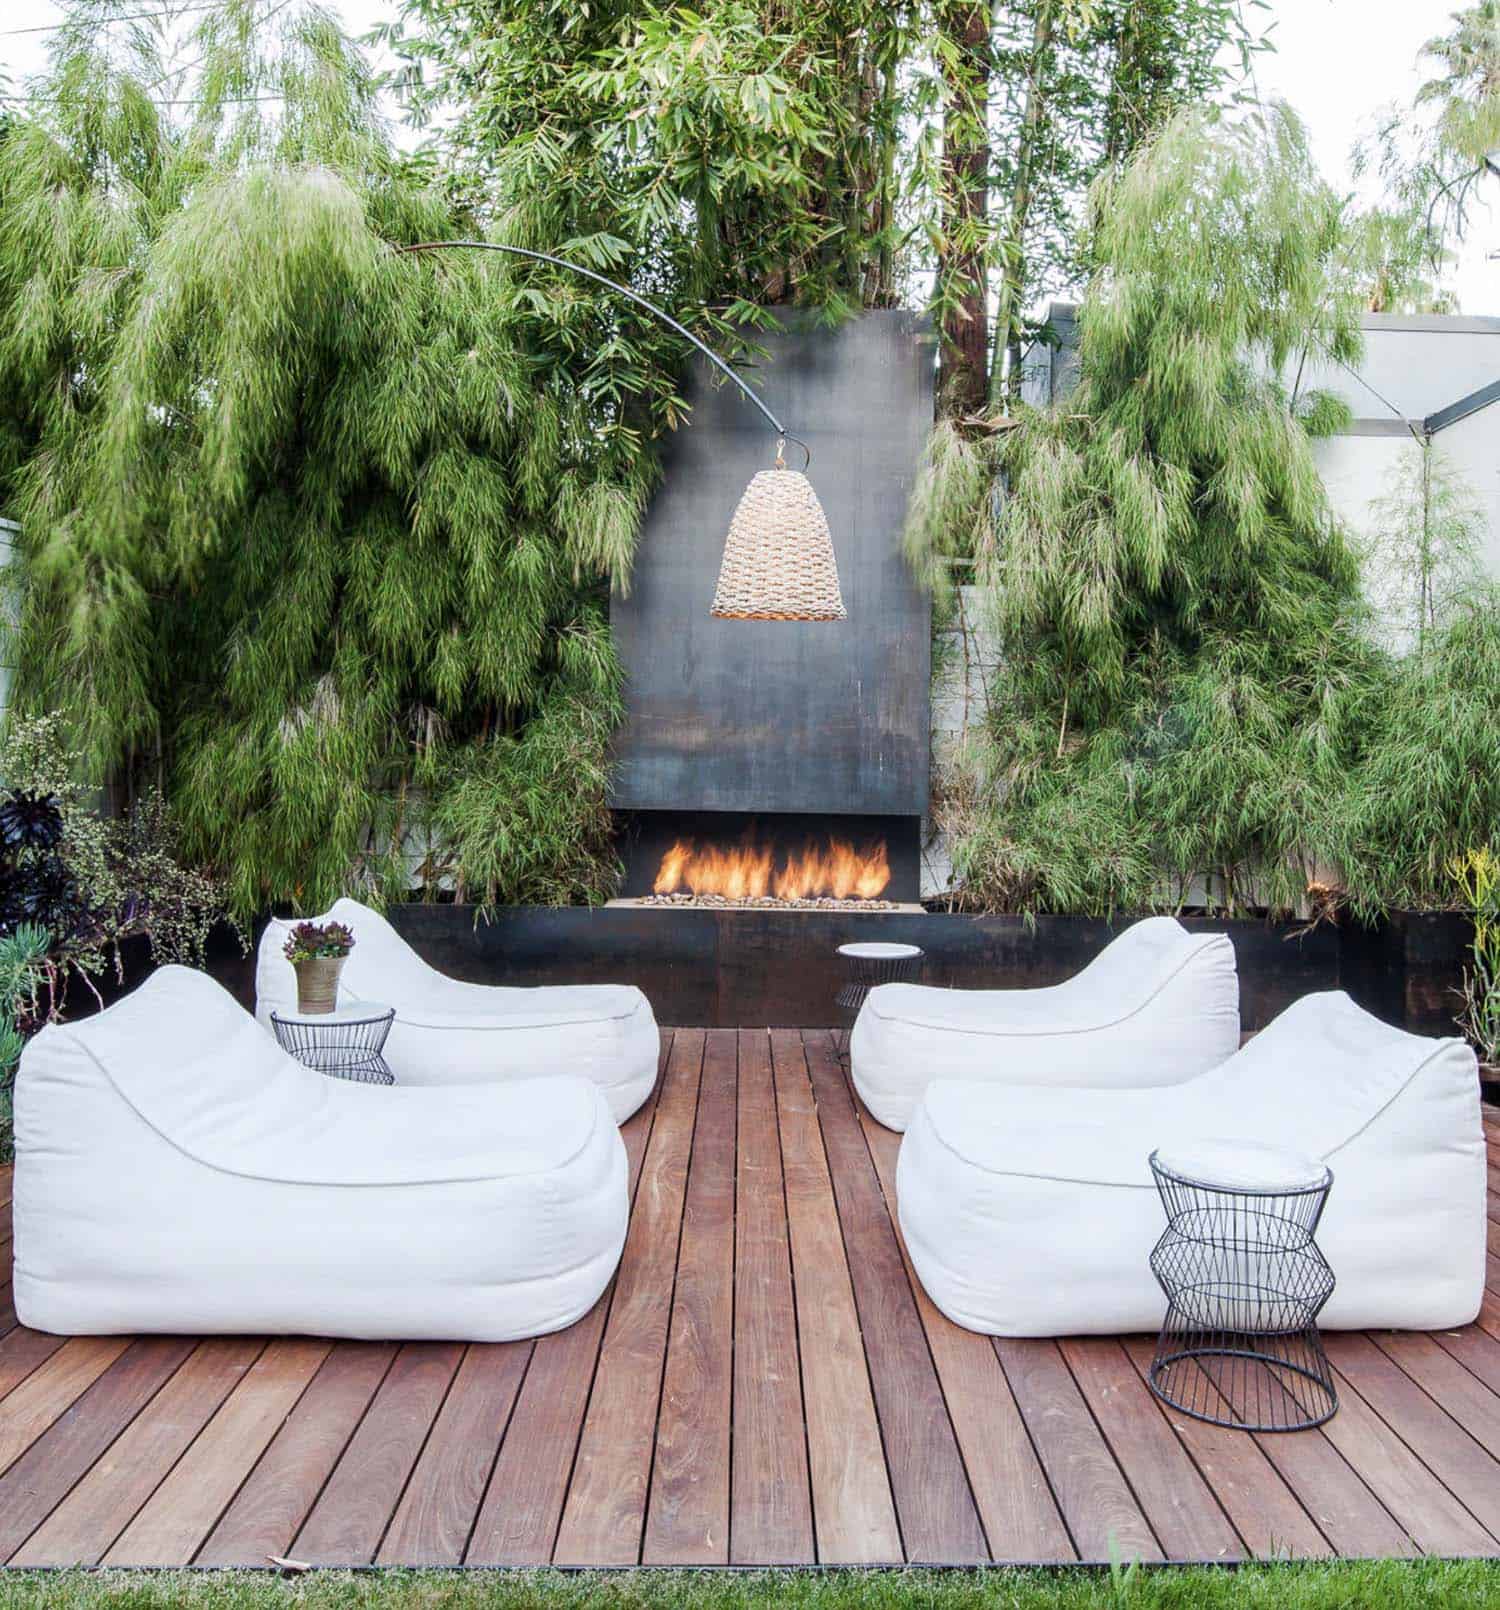 backyard-deck-with-a-fireplace-and-bean-bag-lounge-chairs